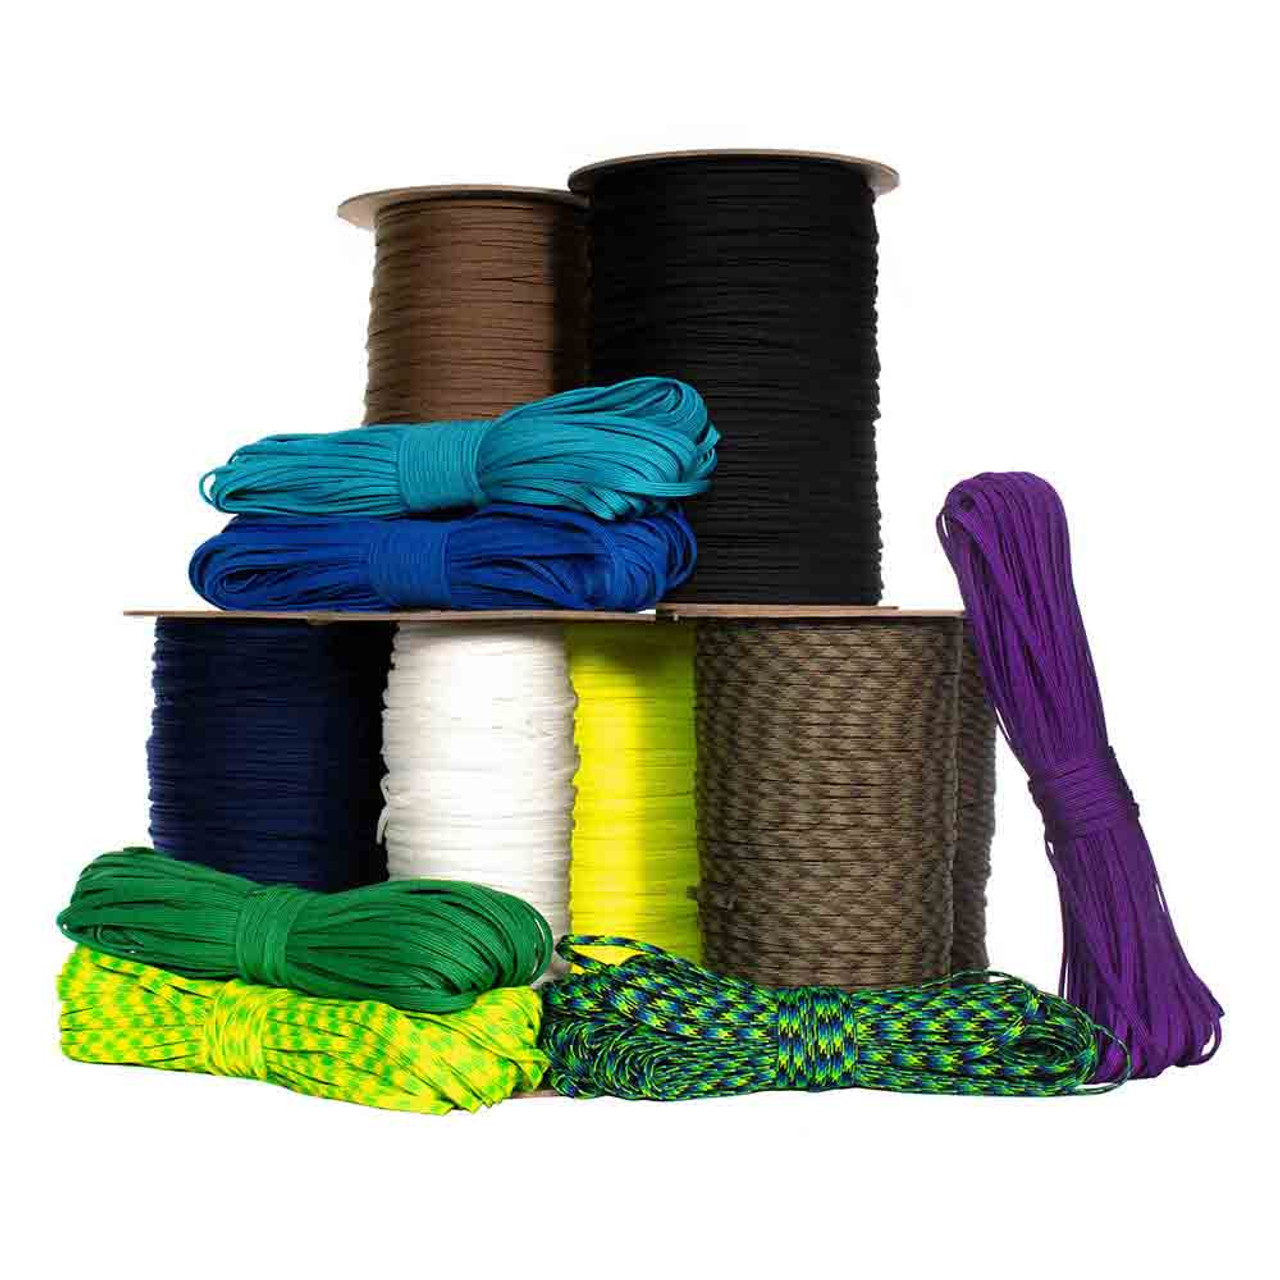 Paracord Planet Colored Bungee Cord and Ball Bungee Kits - 10 Feet